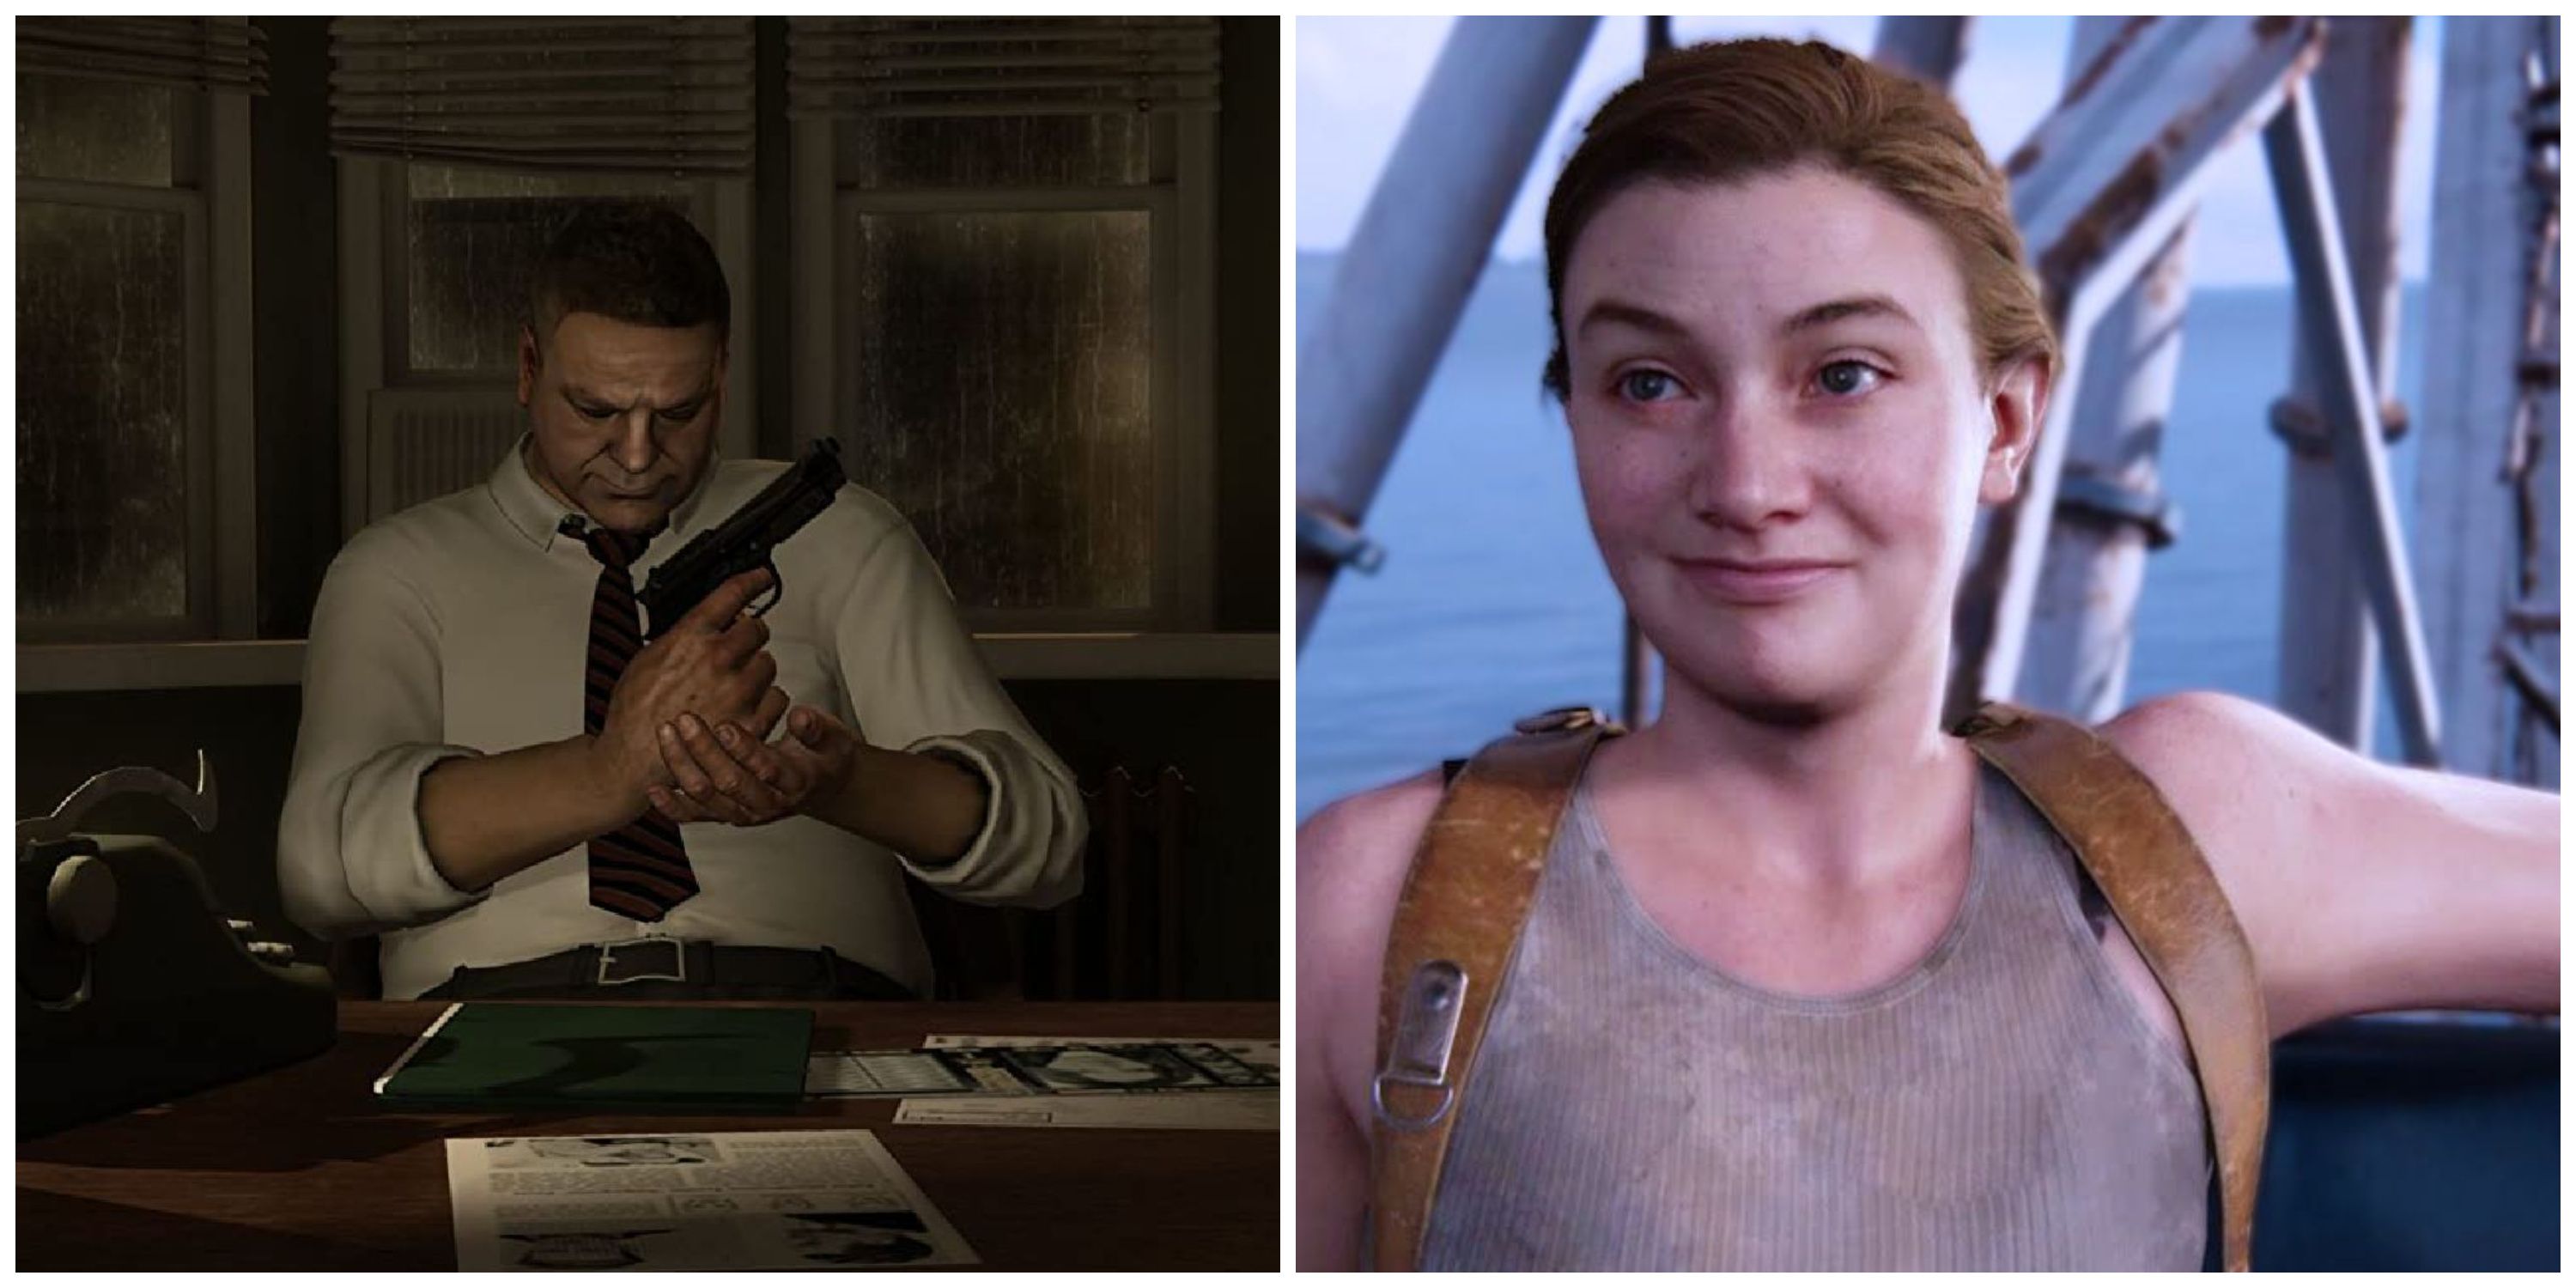 Games That Explore the Psychology of Villains (Heavy Rain and The Last of Us: Part 2)